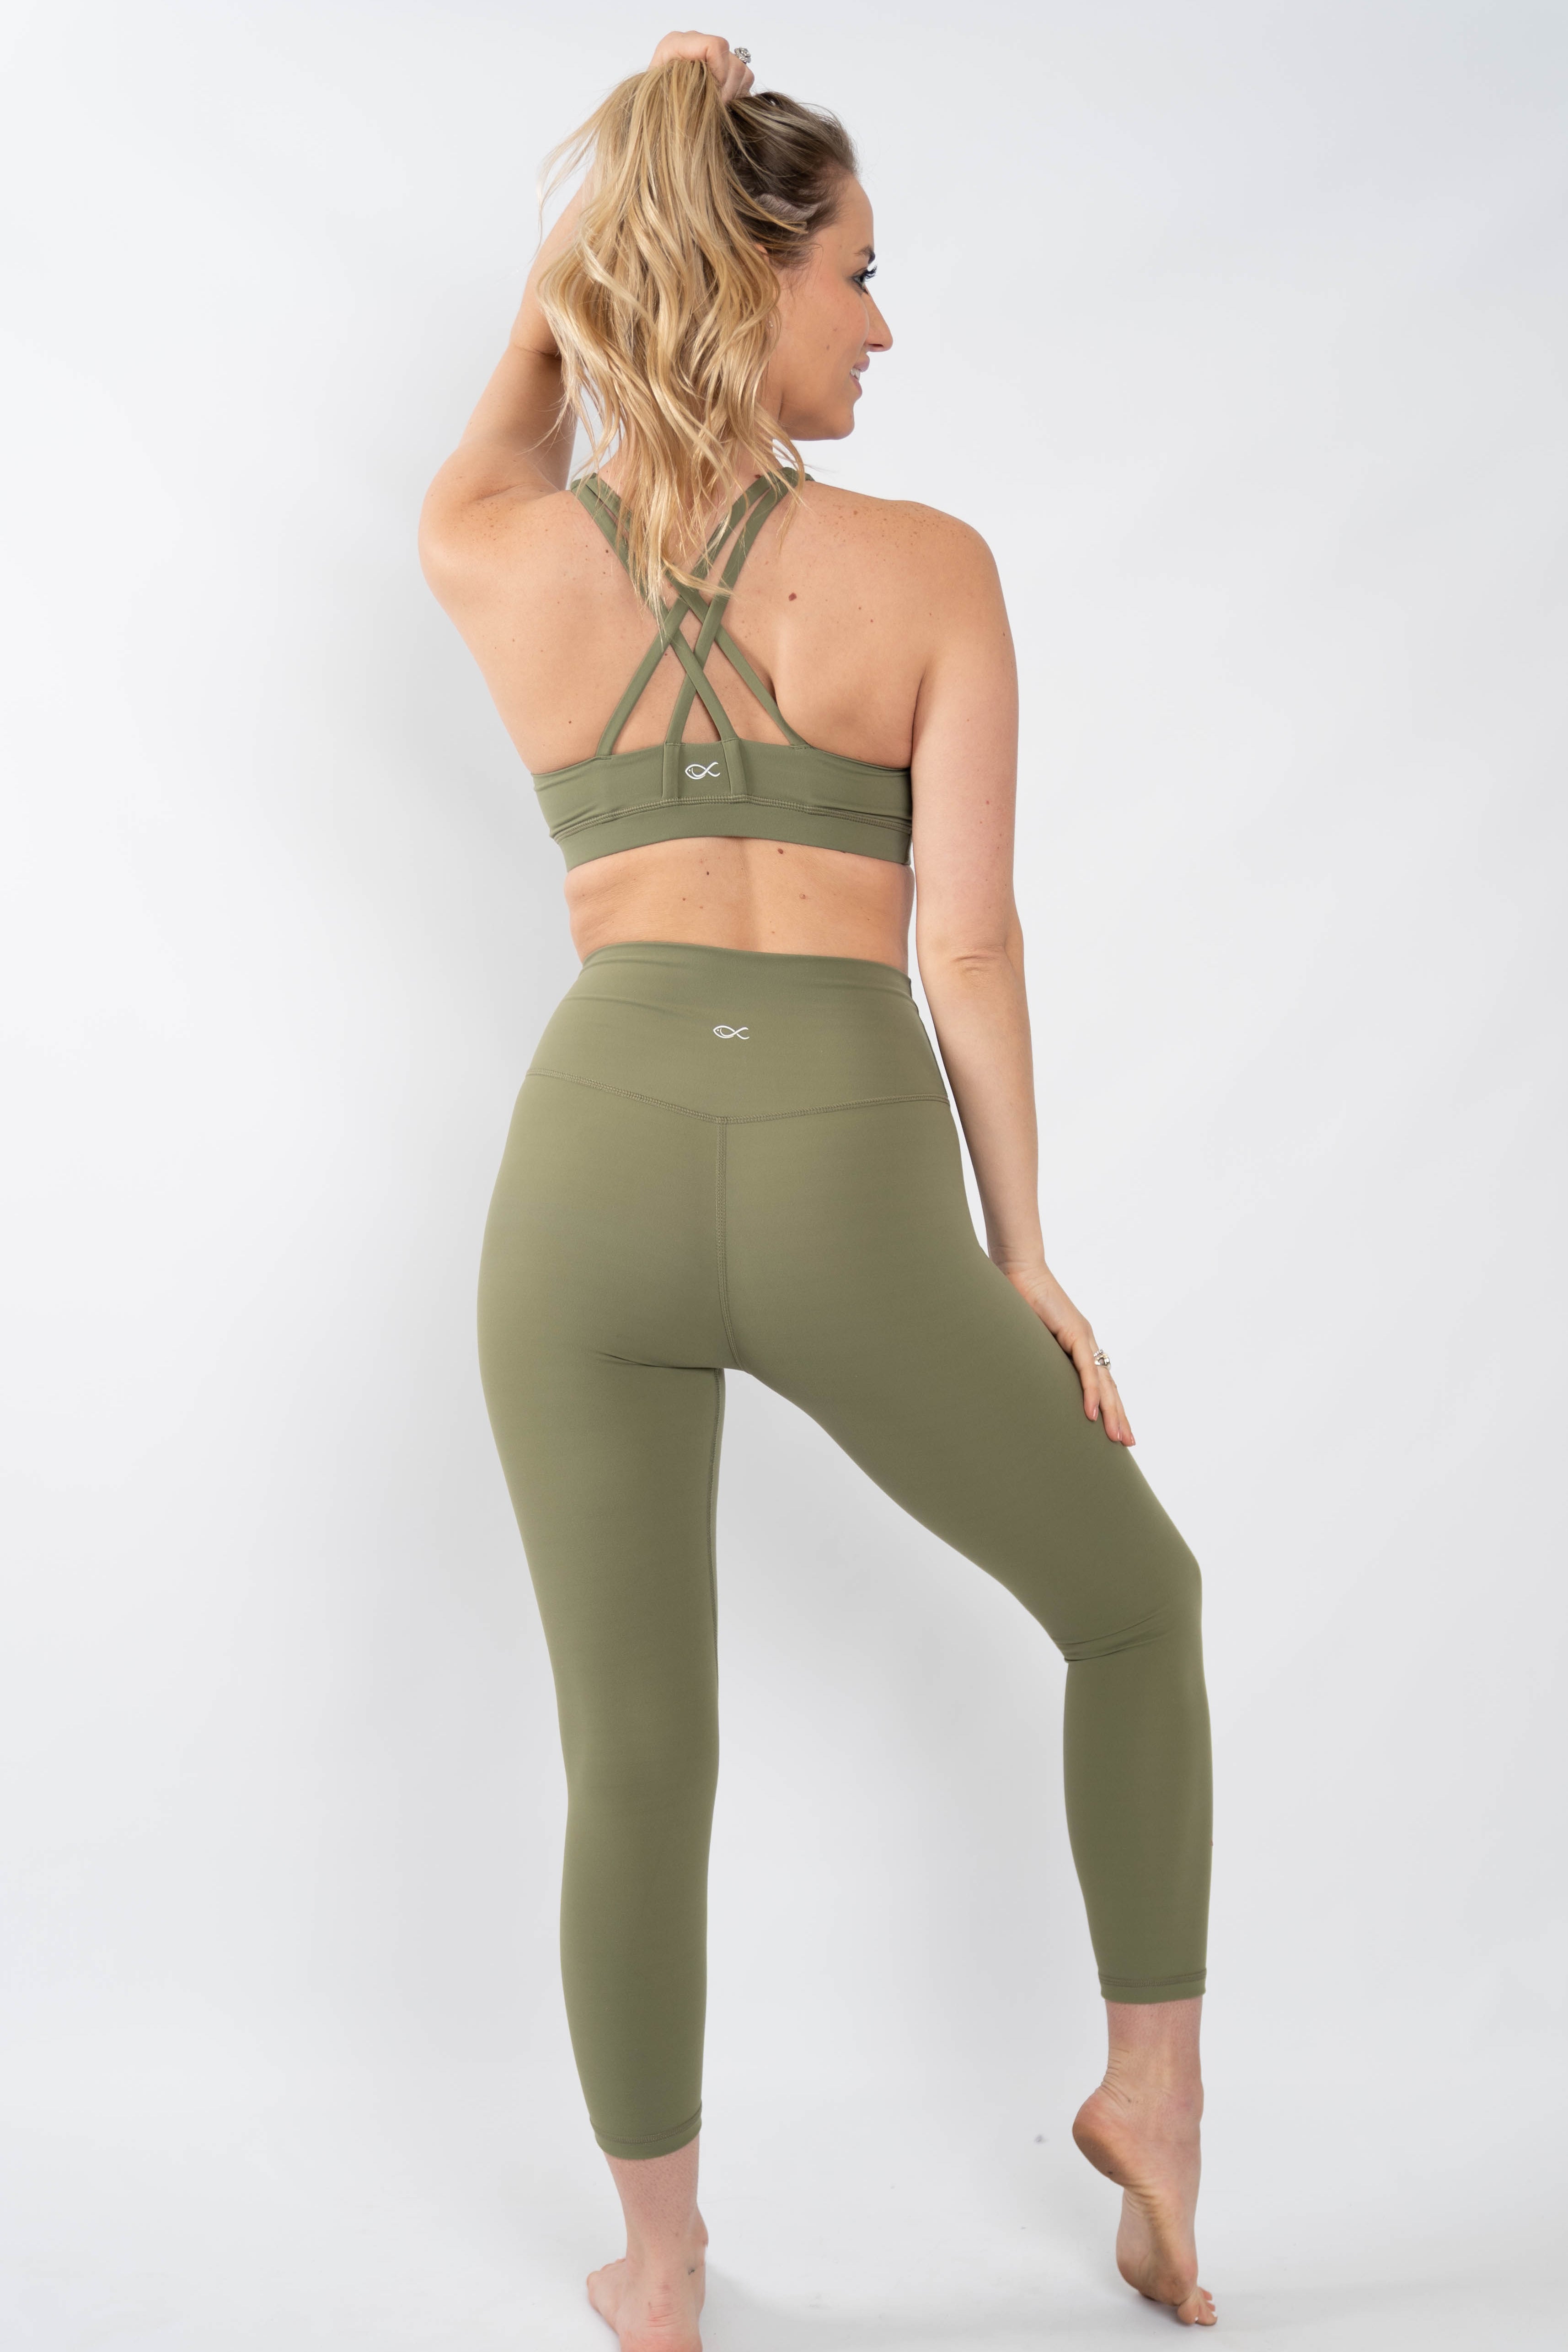 Bliss Leggings in Capulet Olive - Southern Athletica